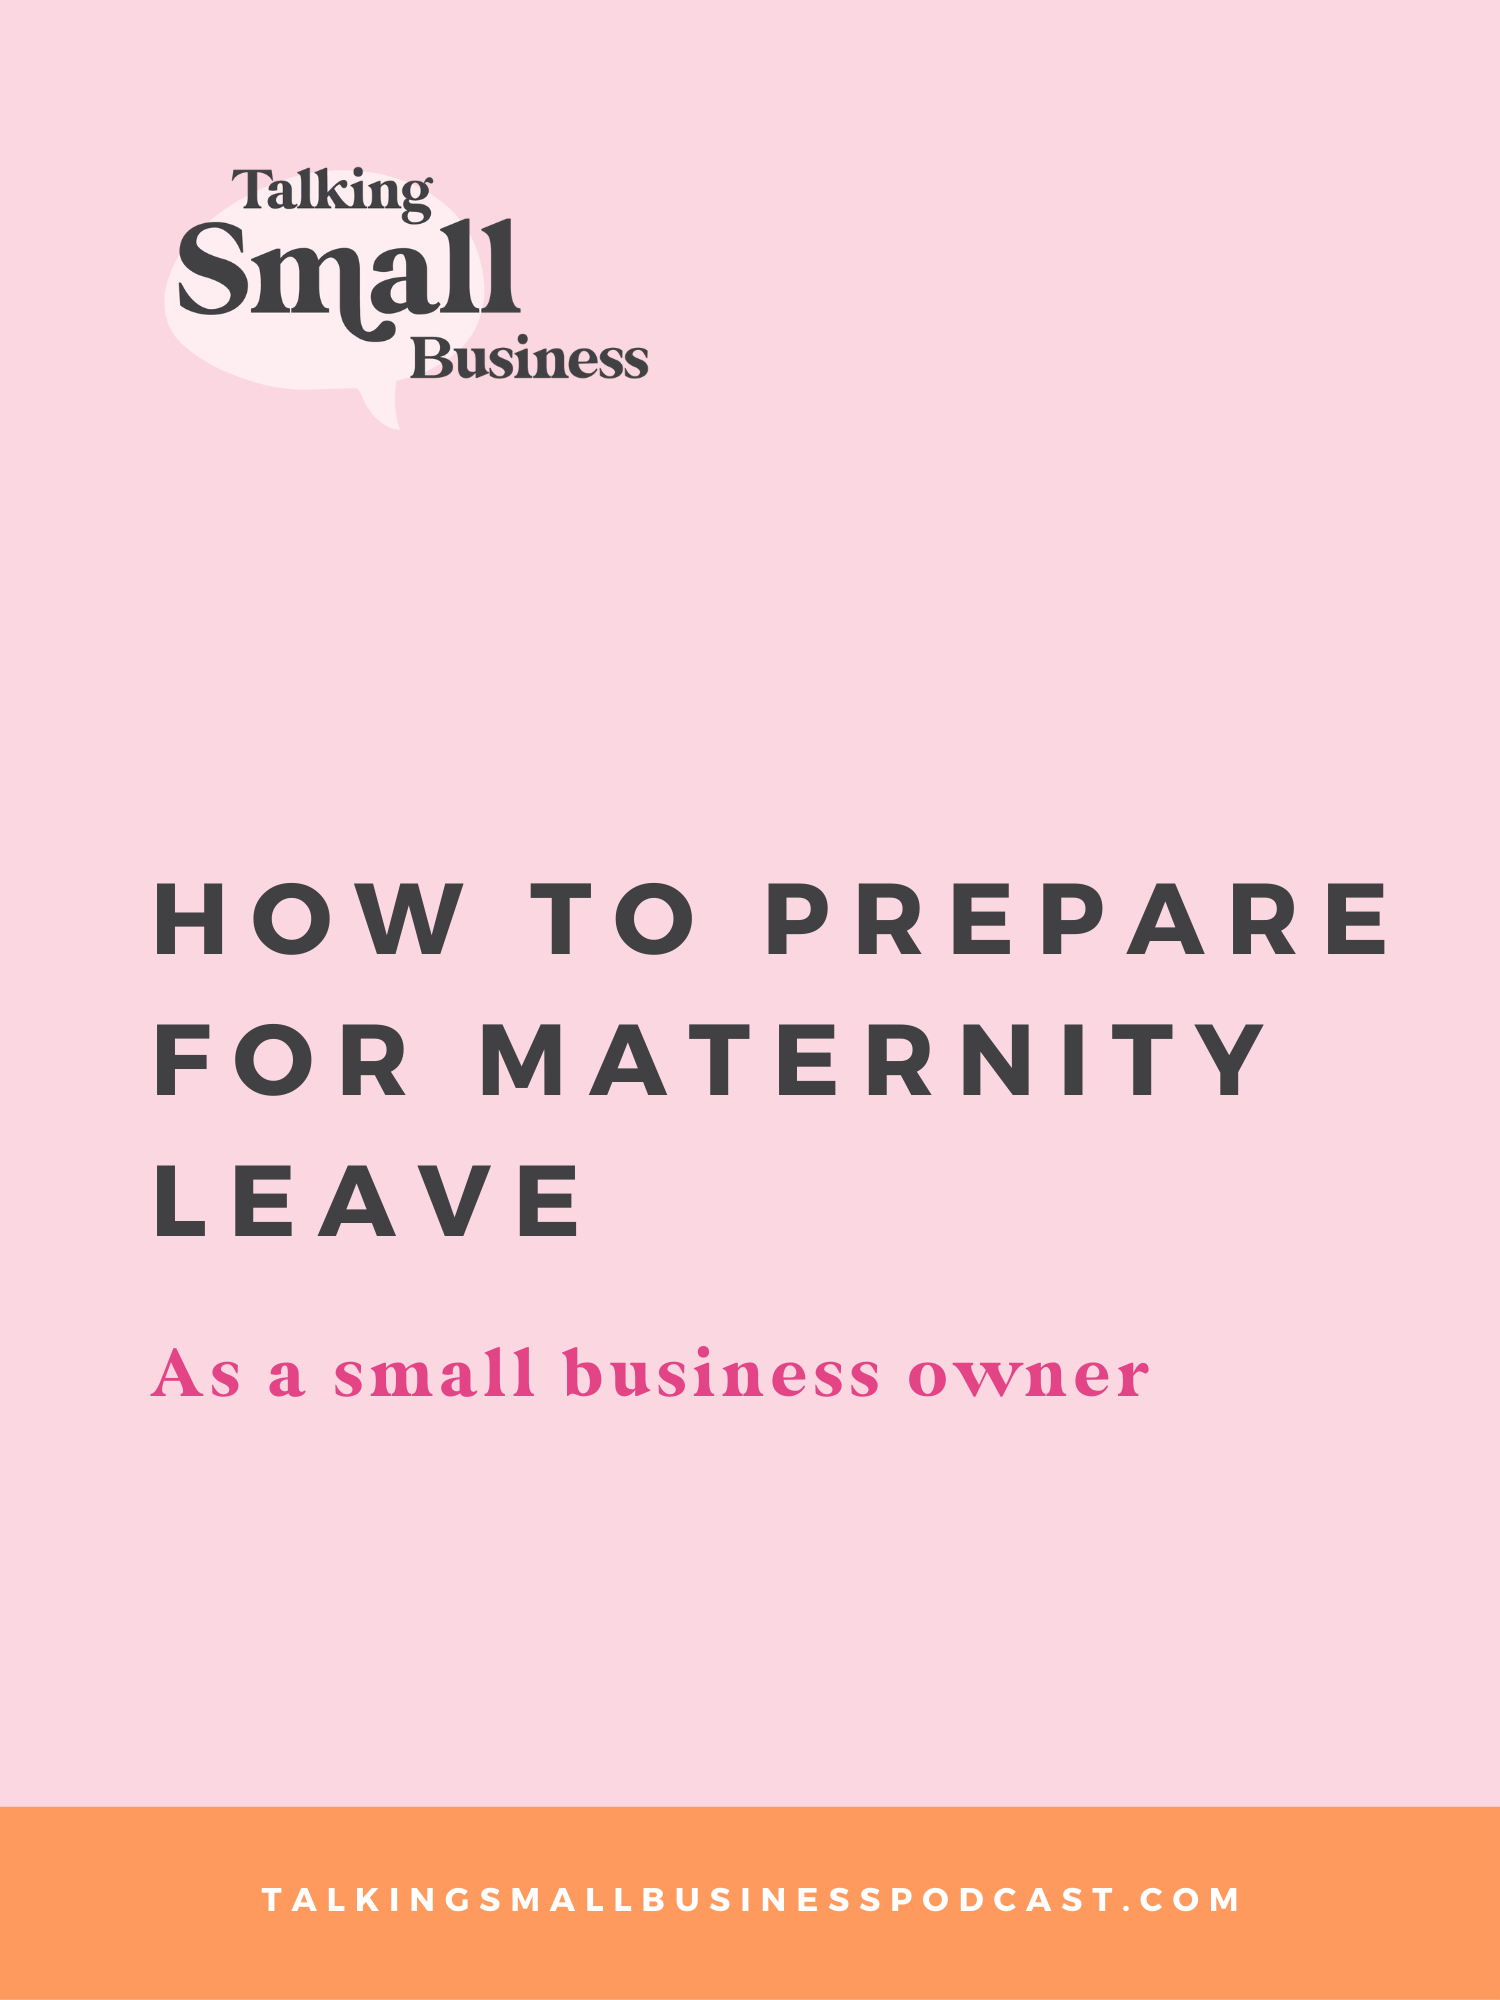 Prepping for maternity leave as a small business owner: Kat Schmoyer shares her experiences as she prepares for baby #3!